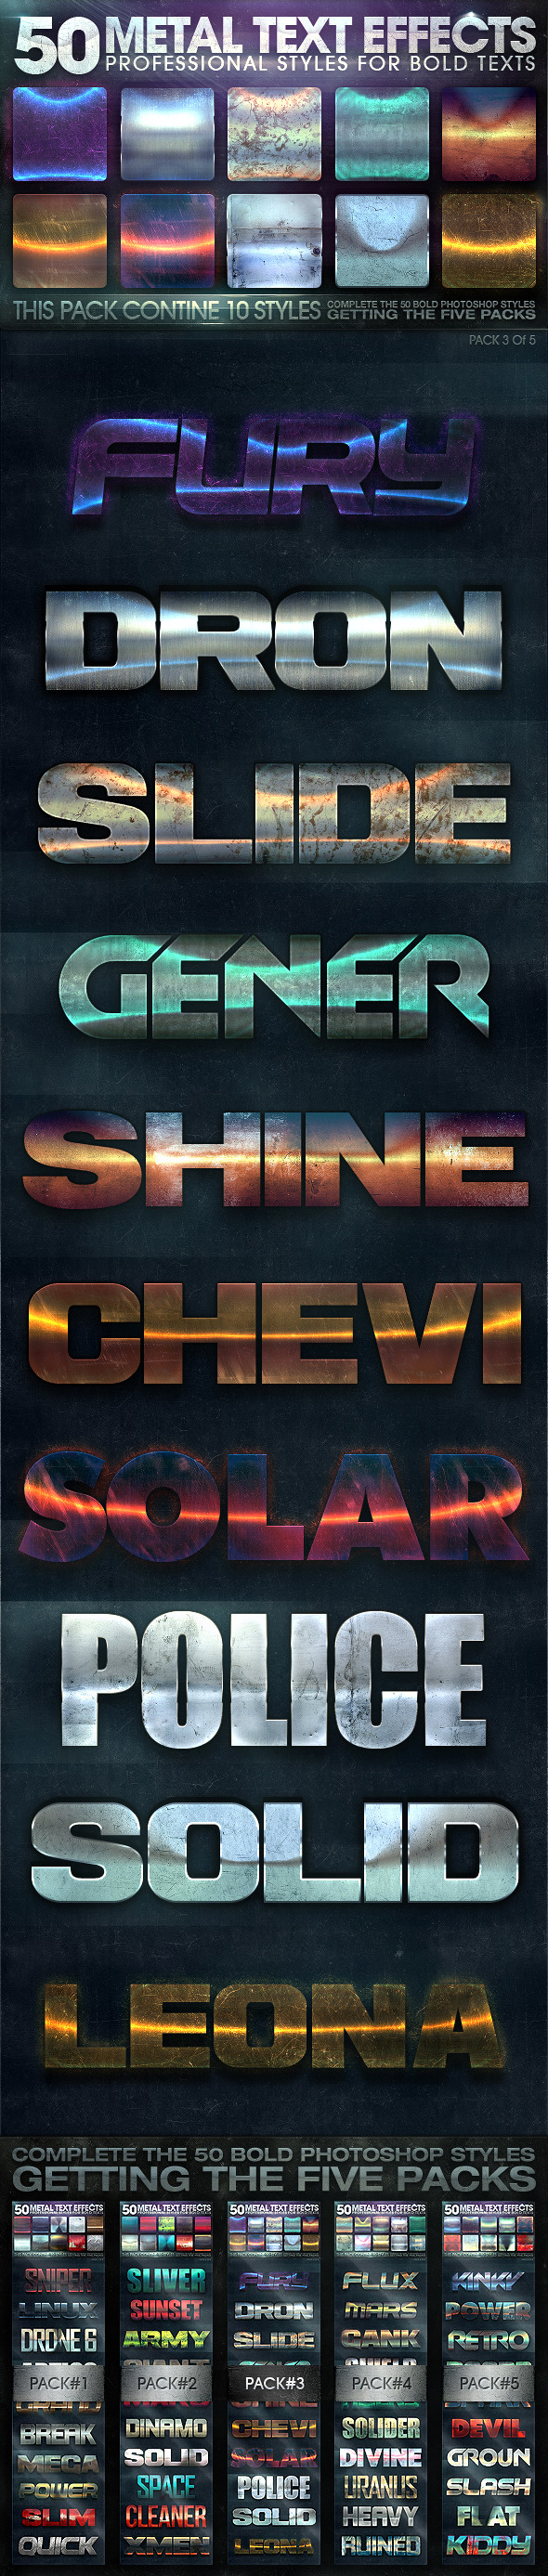 50 Metal Text Effects 3 of 5